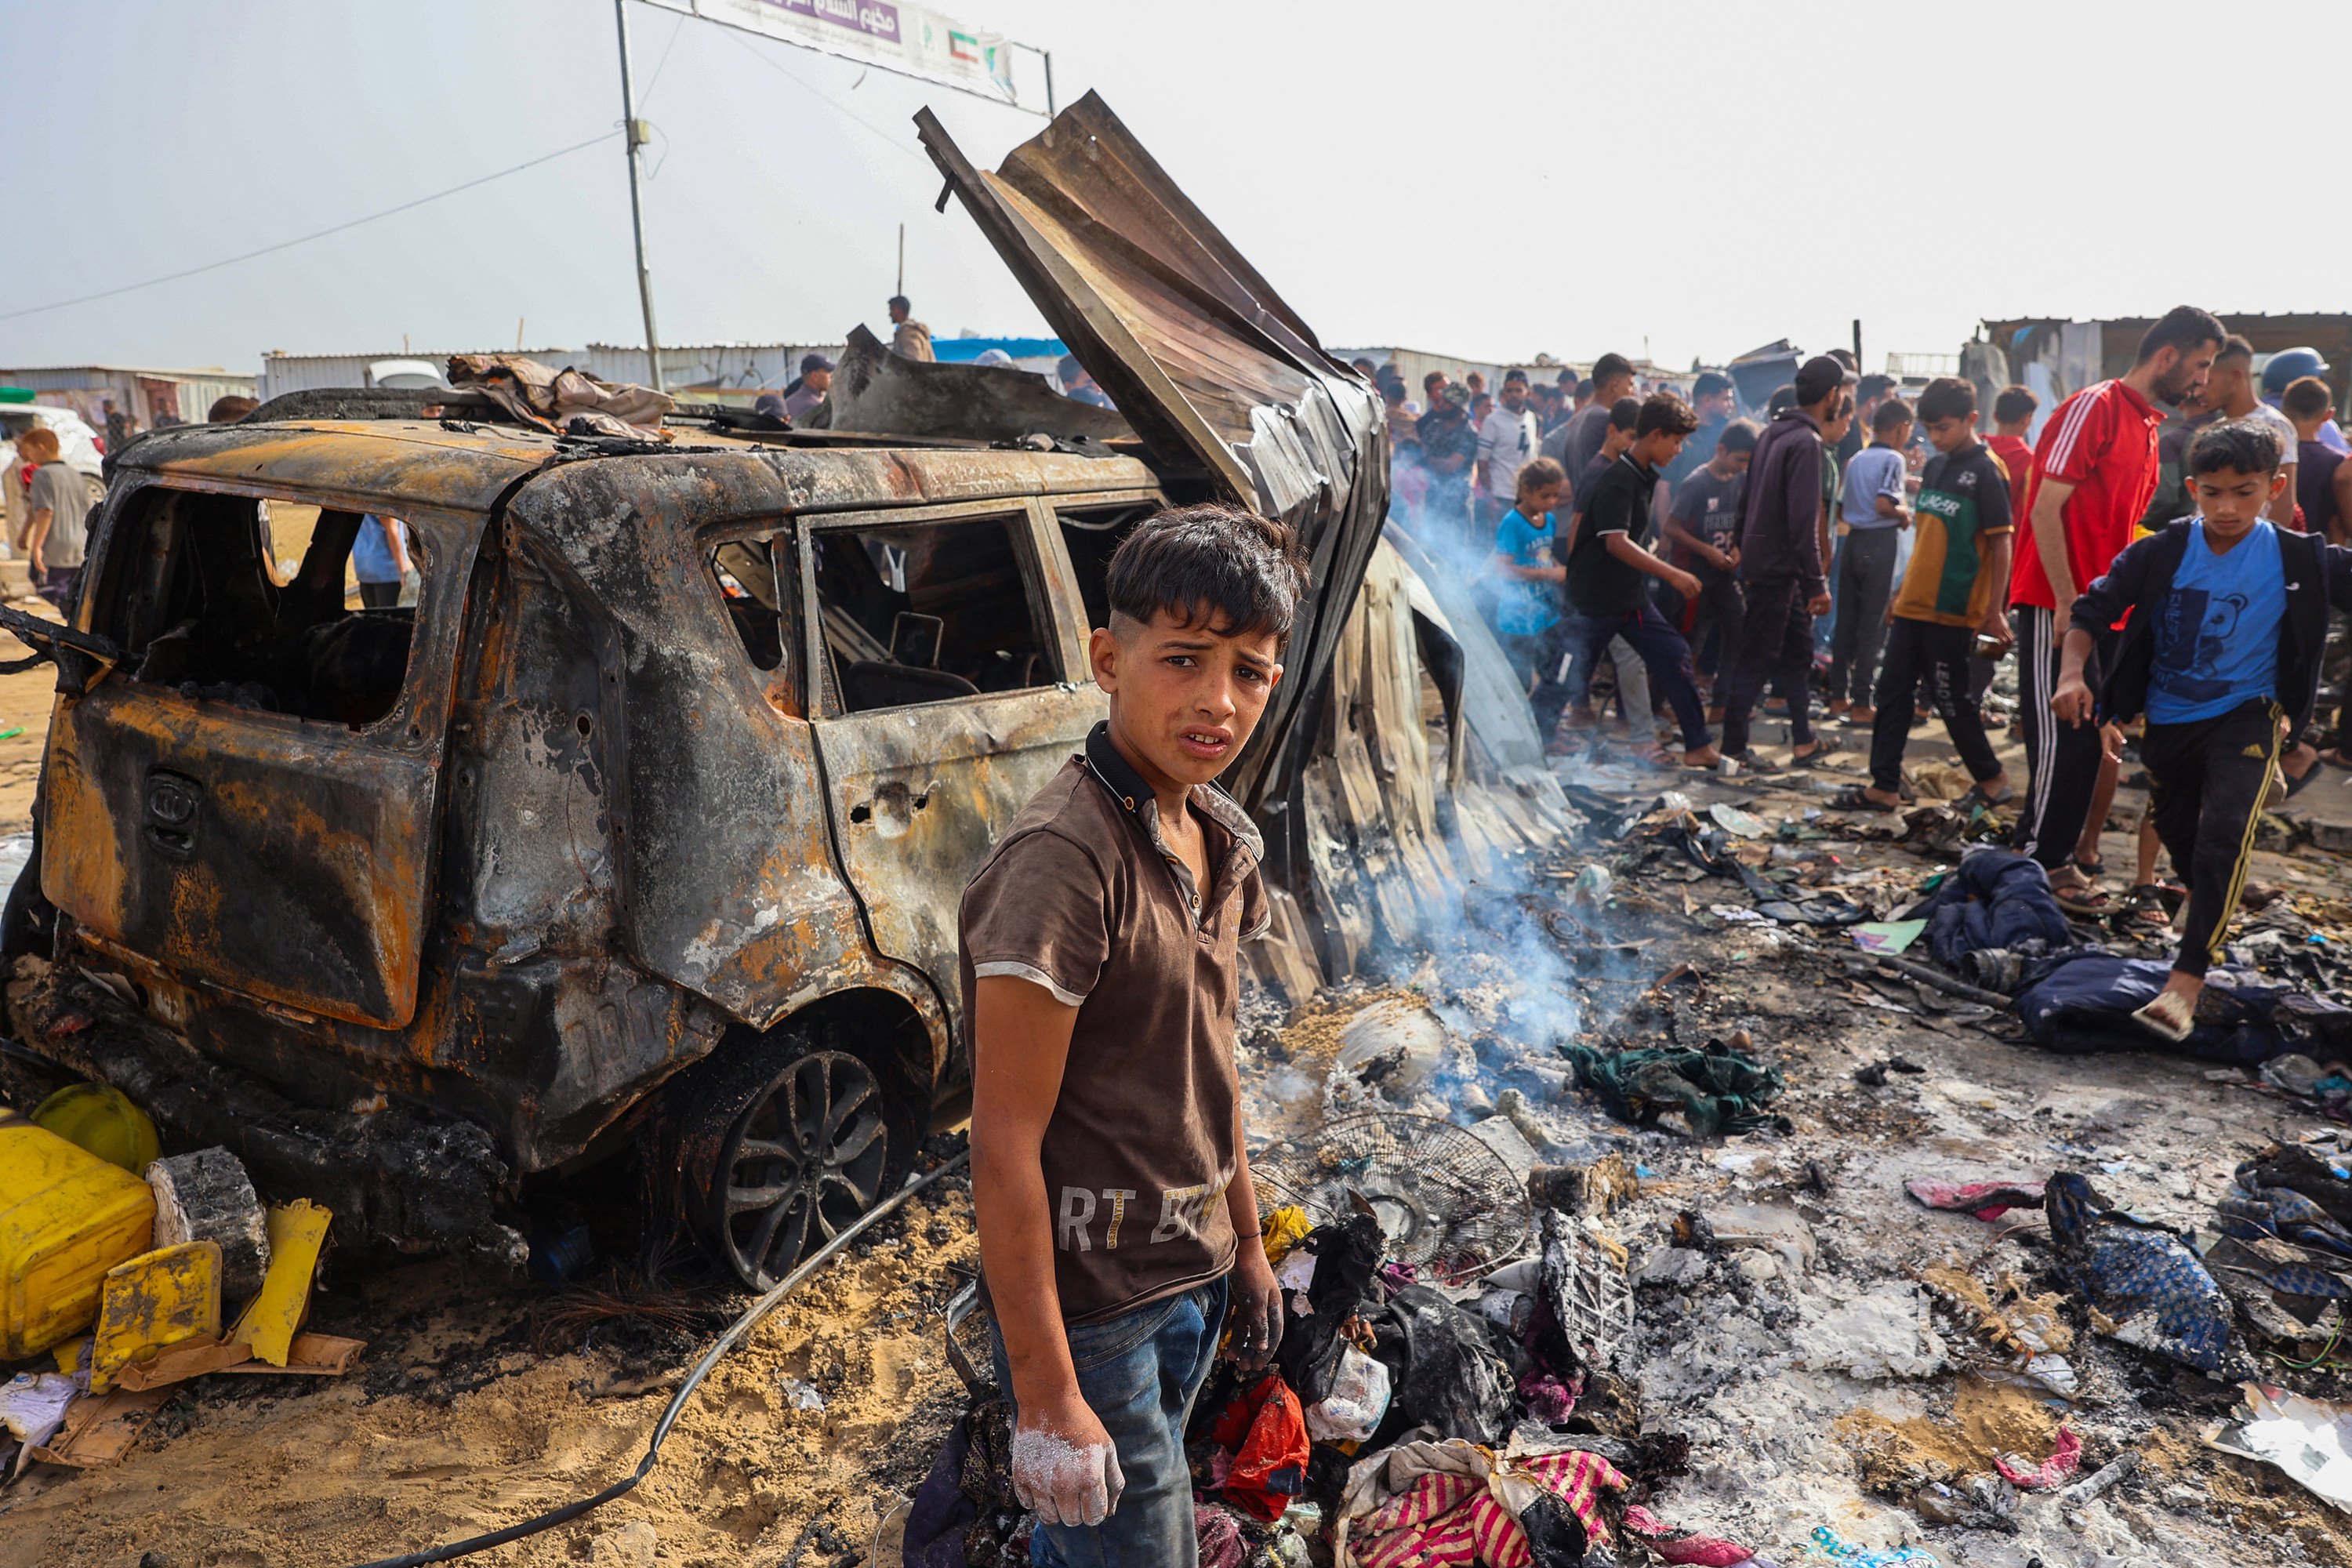 Palestinians gather at the site of an Israeli strike on a camp area housing internally displaced people in Rafah amid ongoing battles between Israel and the Palestinian Hamas militant group. Photo: TNS